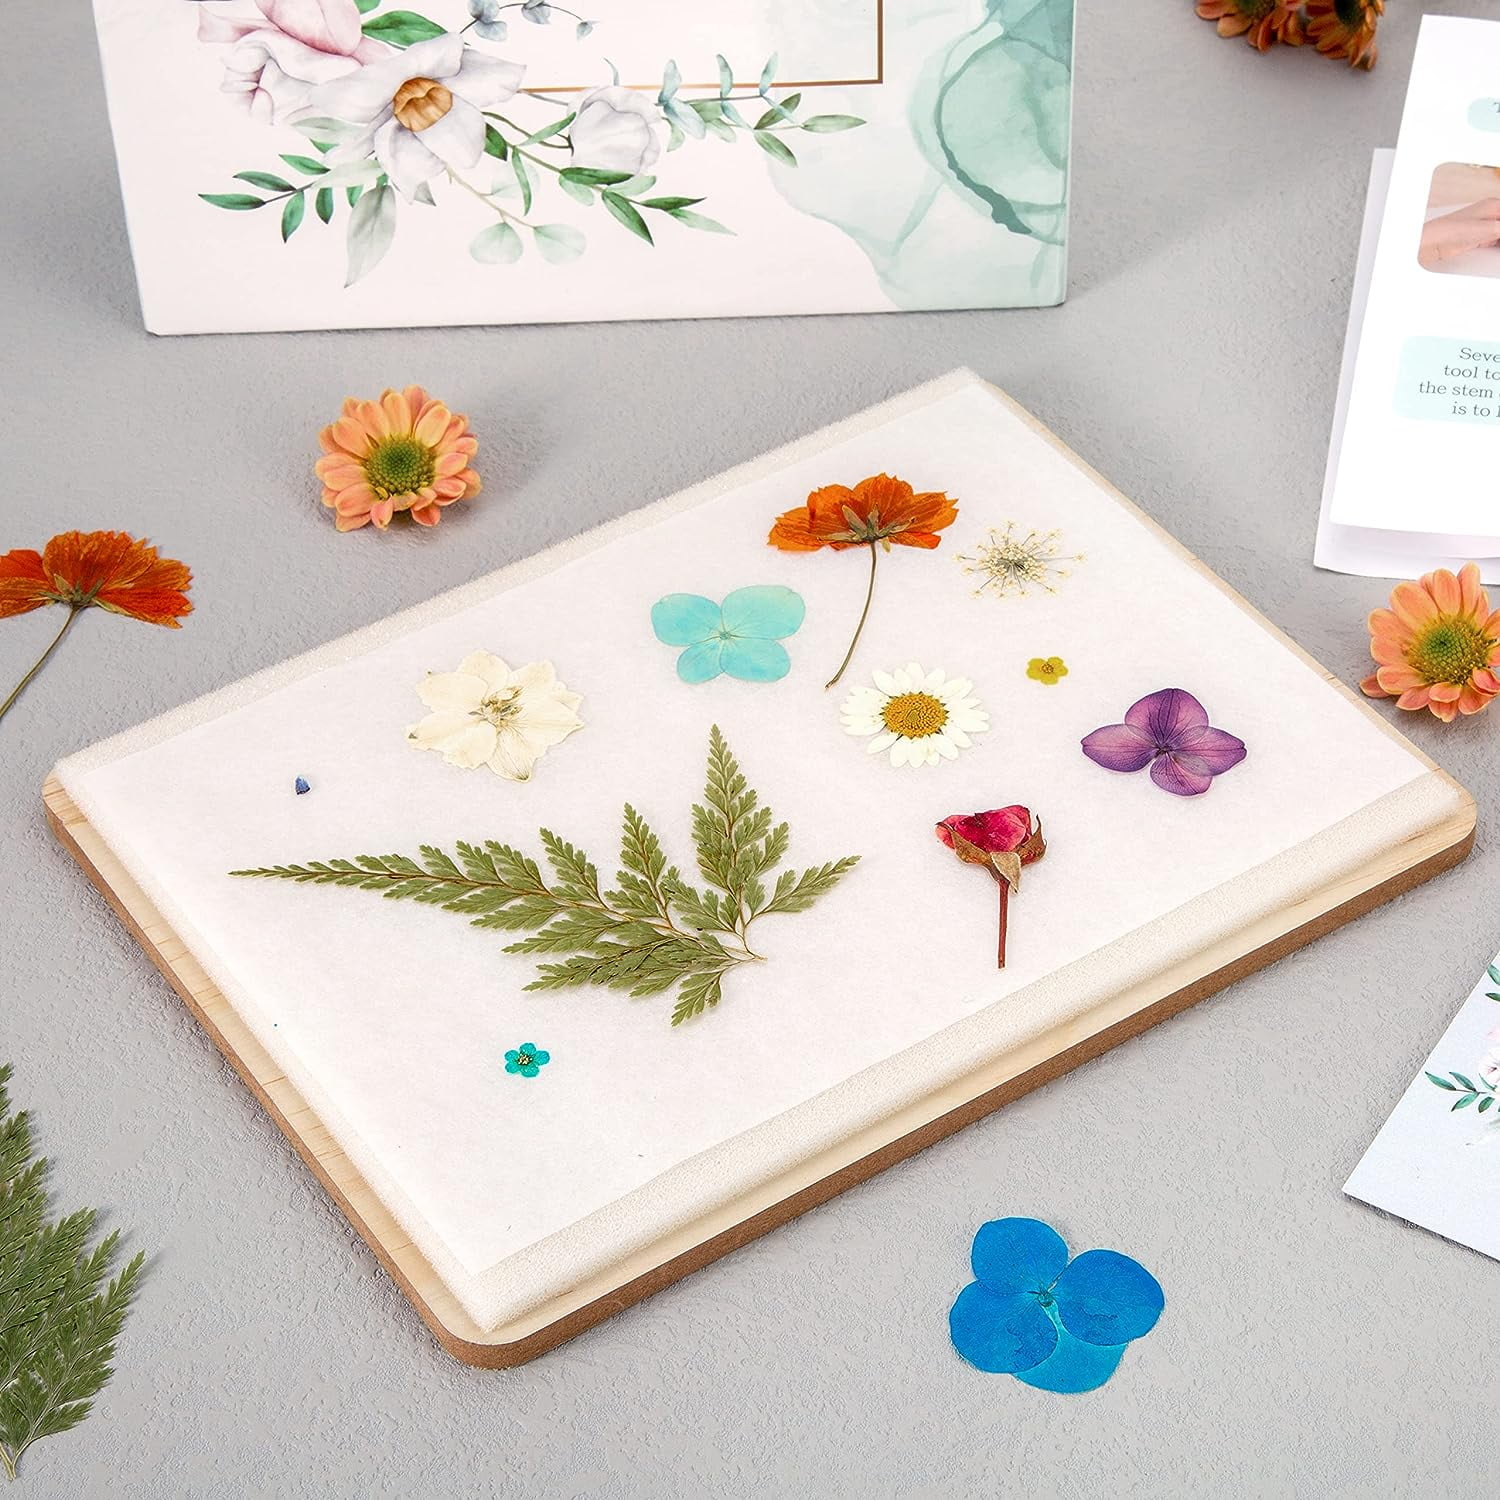 Best flower press kits for natural crafting